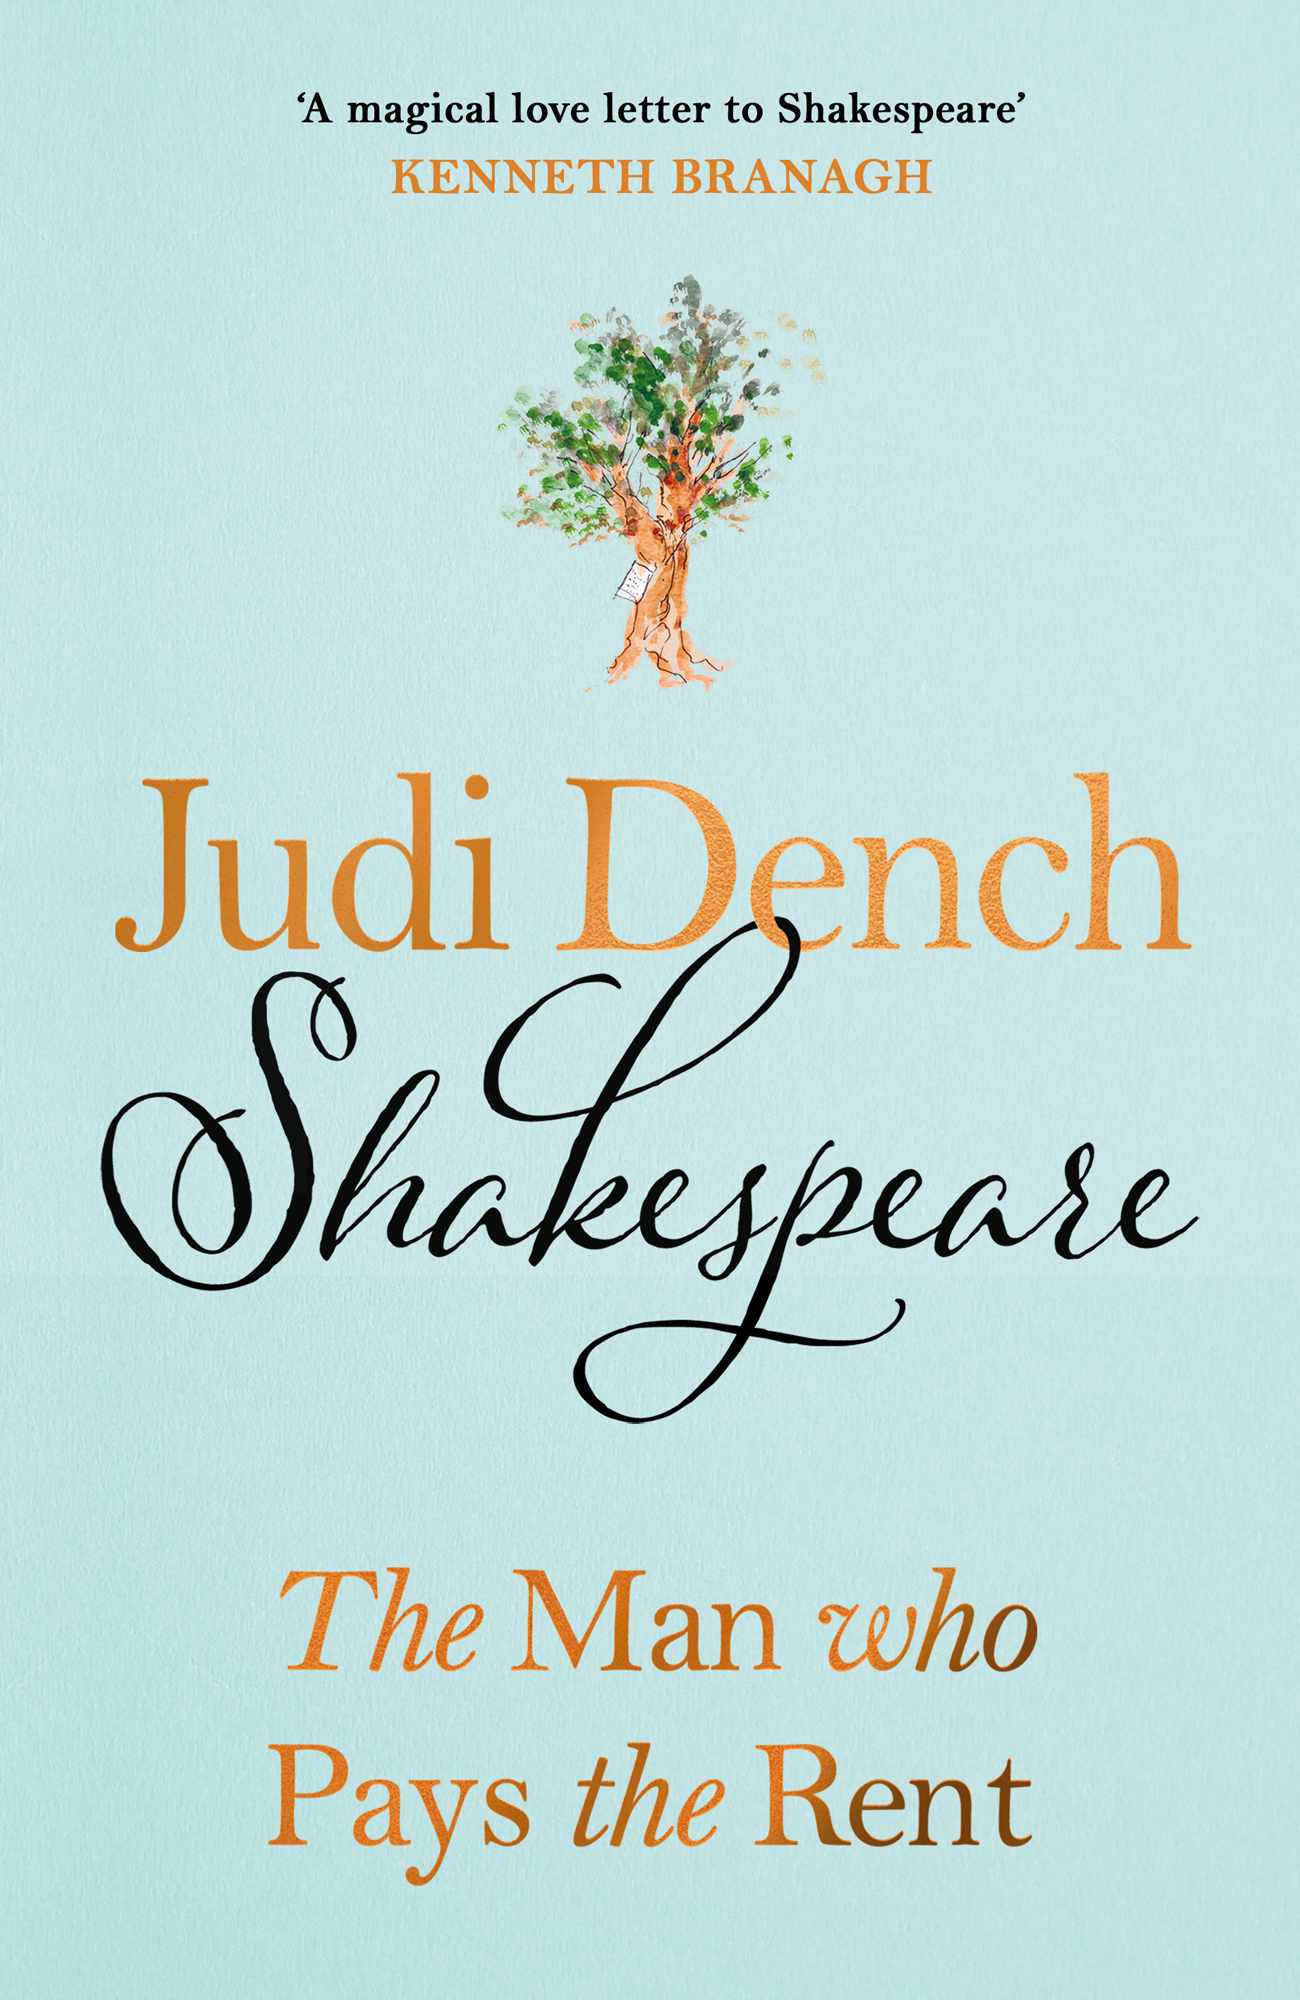 Shakespeare: The Man Who Pays the Rent by Judi Dench and Brendan O'Hea